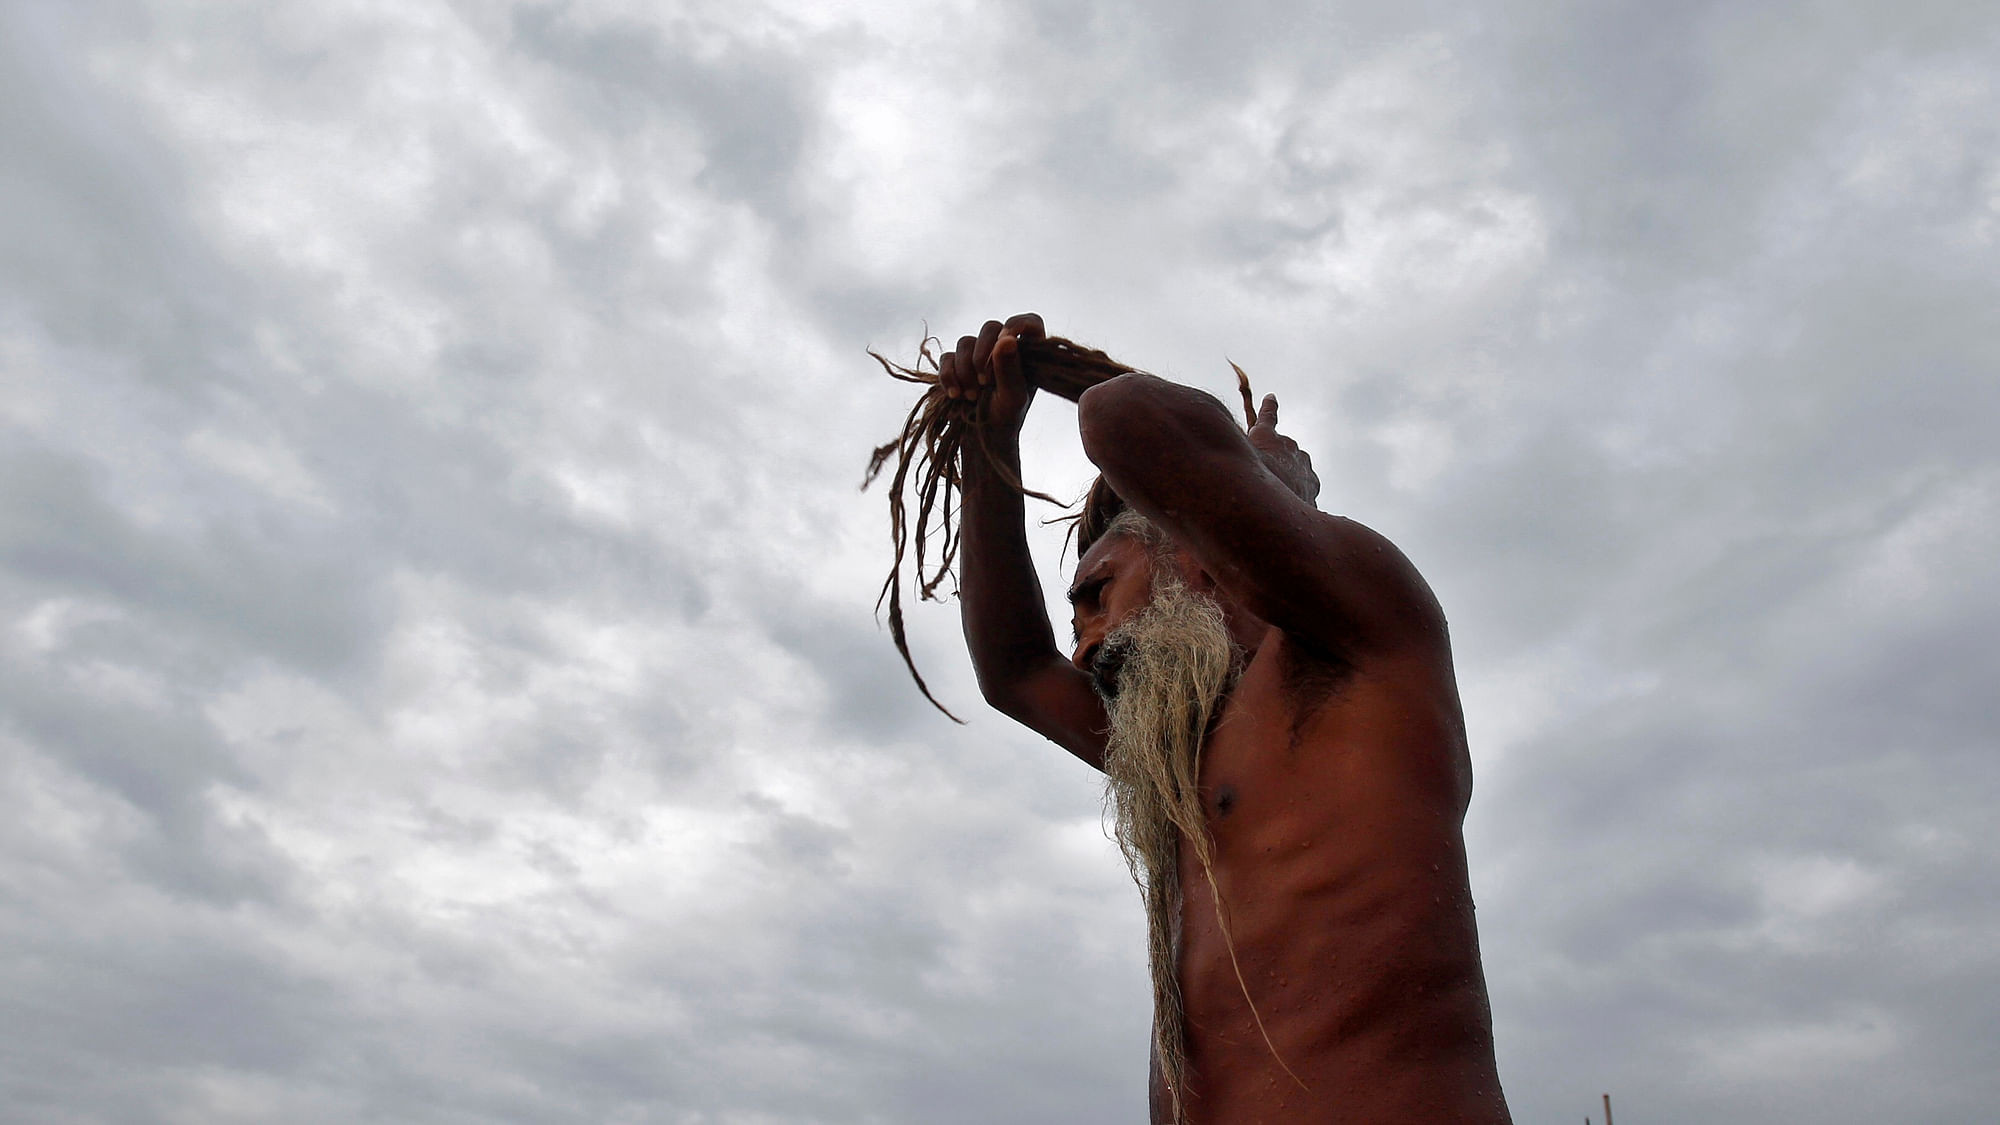  A sadhu adjusts his dreadlocks after taking a holy dip in the waters of Sangam in&nbsp; Allahabad. (Photo: Reuters) 